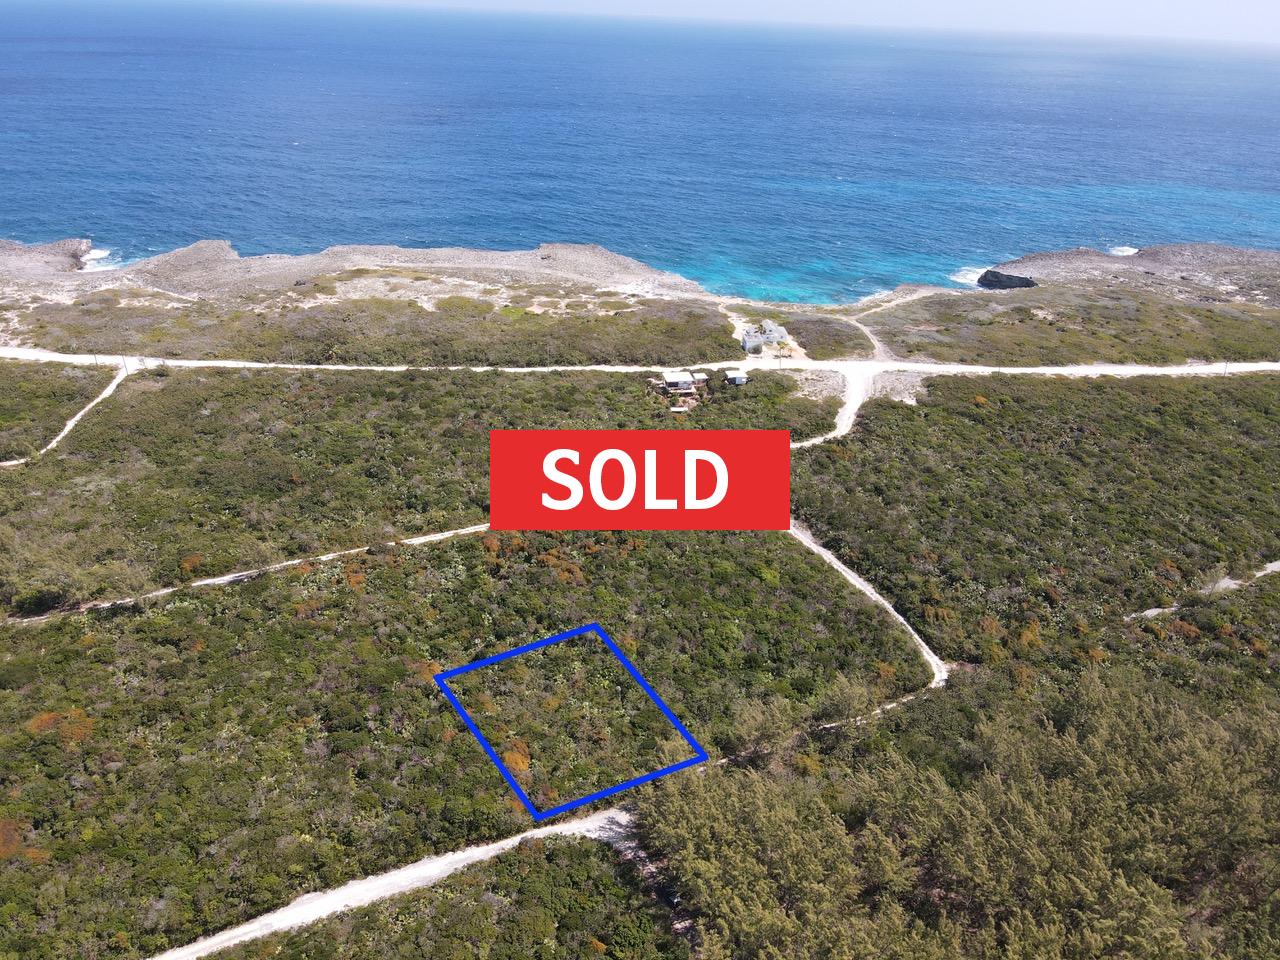 Eleuthera Real Estate - Homes, for Sale and Rentals in Bahamas